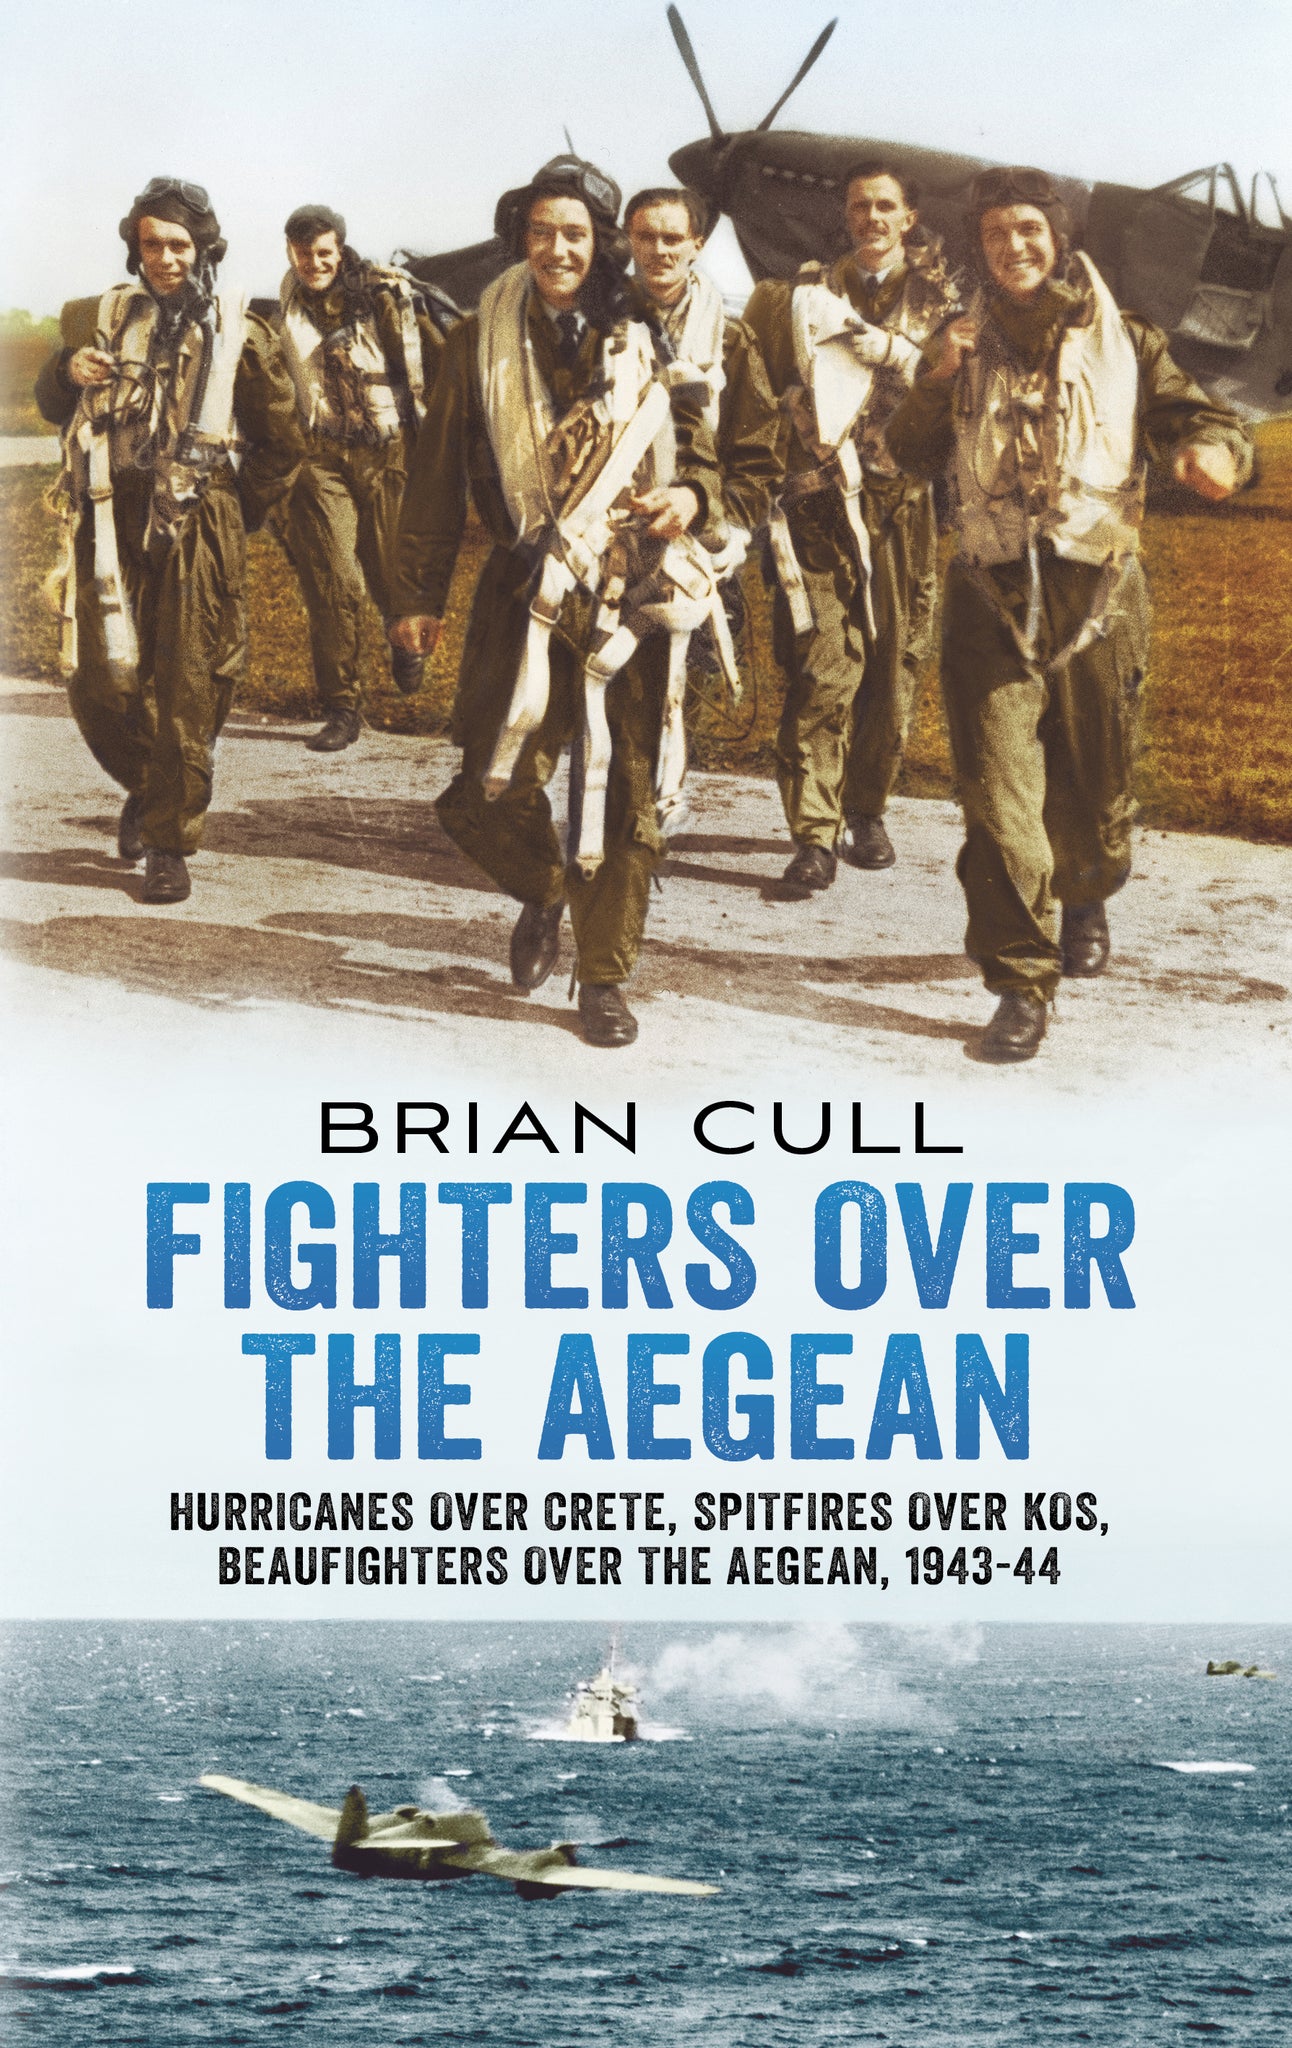 Fighters over the Aegean: Hurricanes over Crete, Spitfires over Kos, Beaufighters over the Aegean (hardback edition)